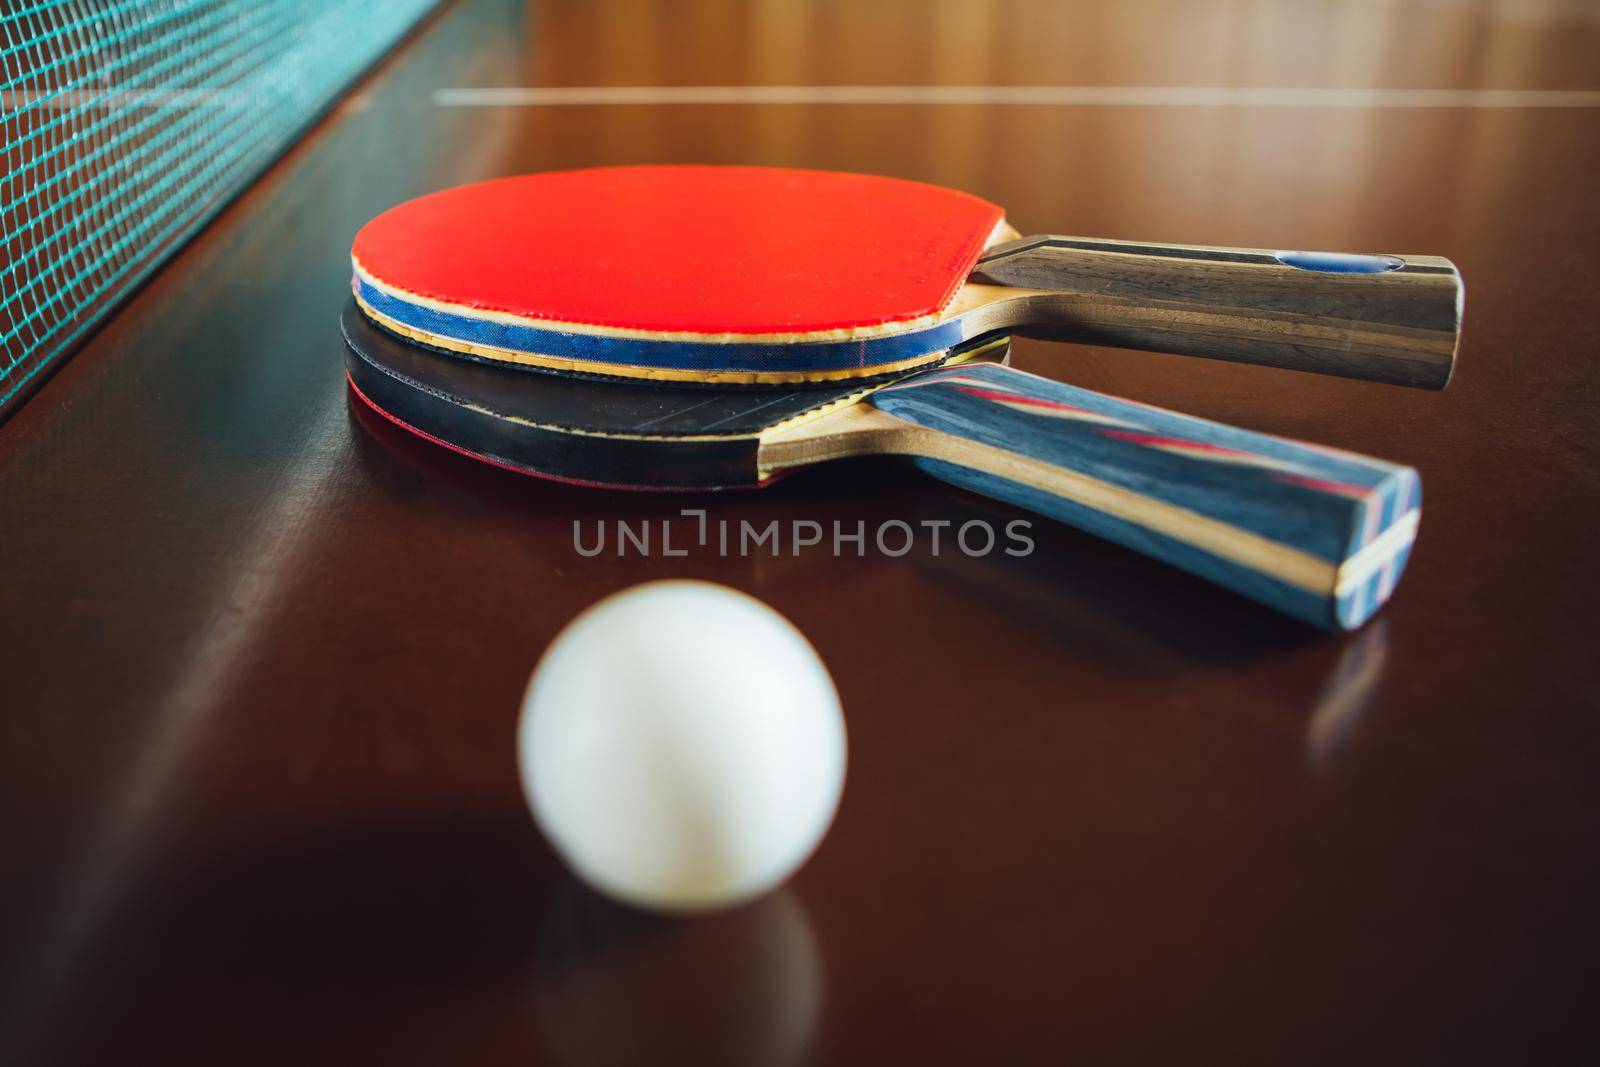 table tennis rackets and ball, close-up view by nikkytok